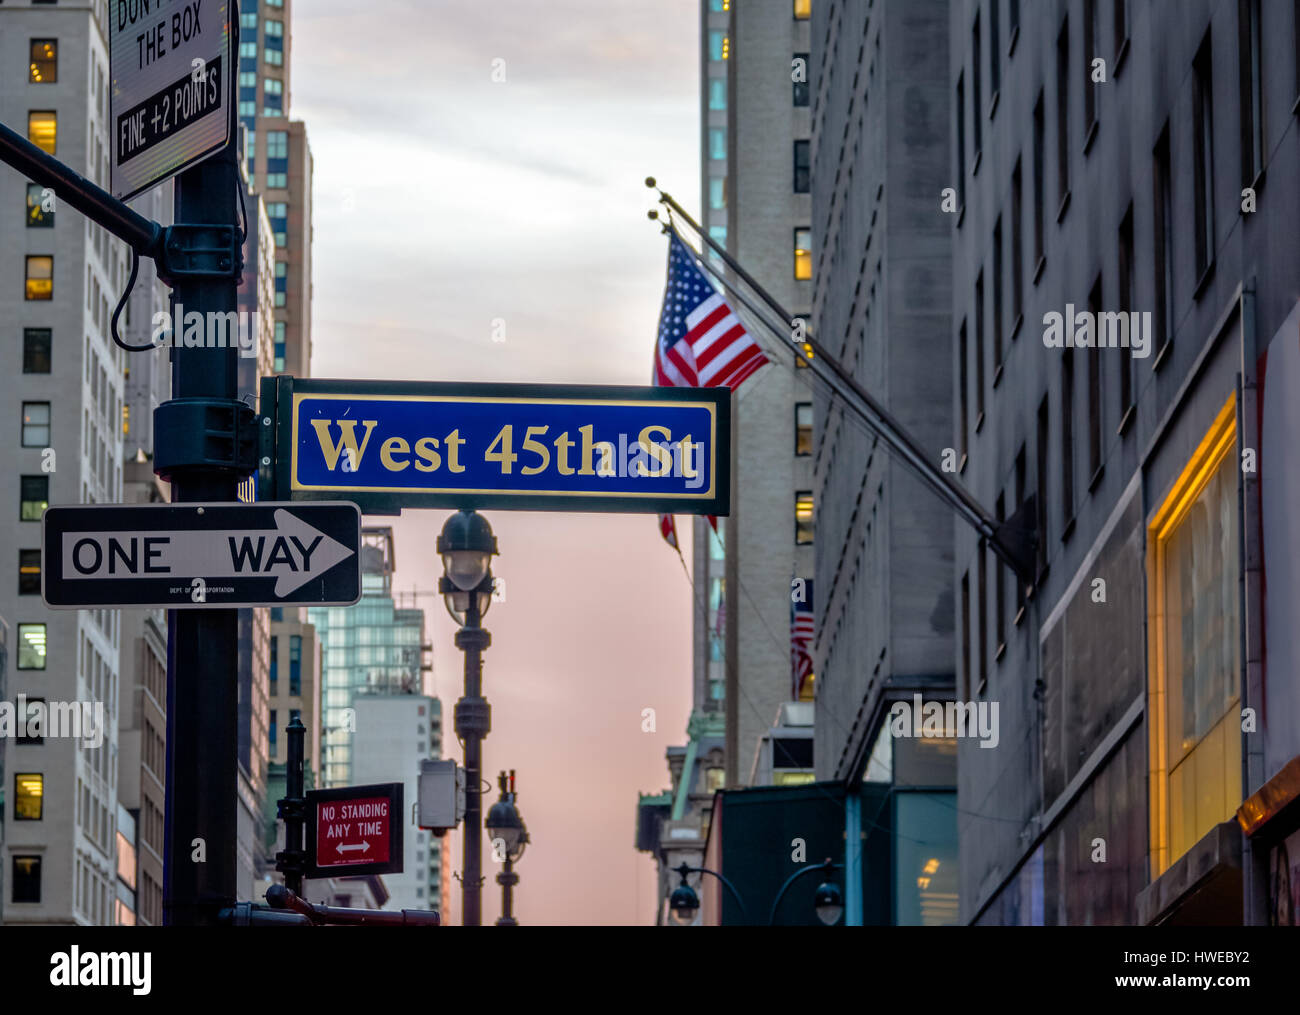 Street sign of West 45th St - New York, USA Stock Photo